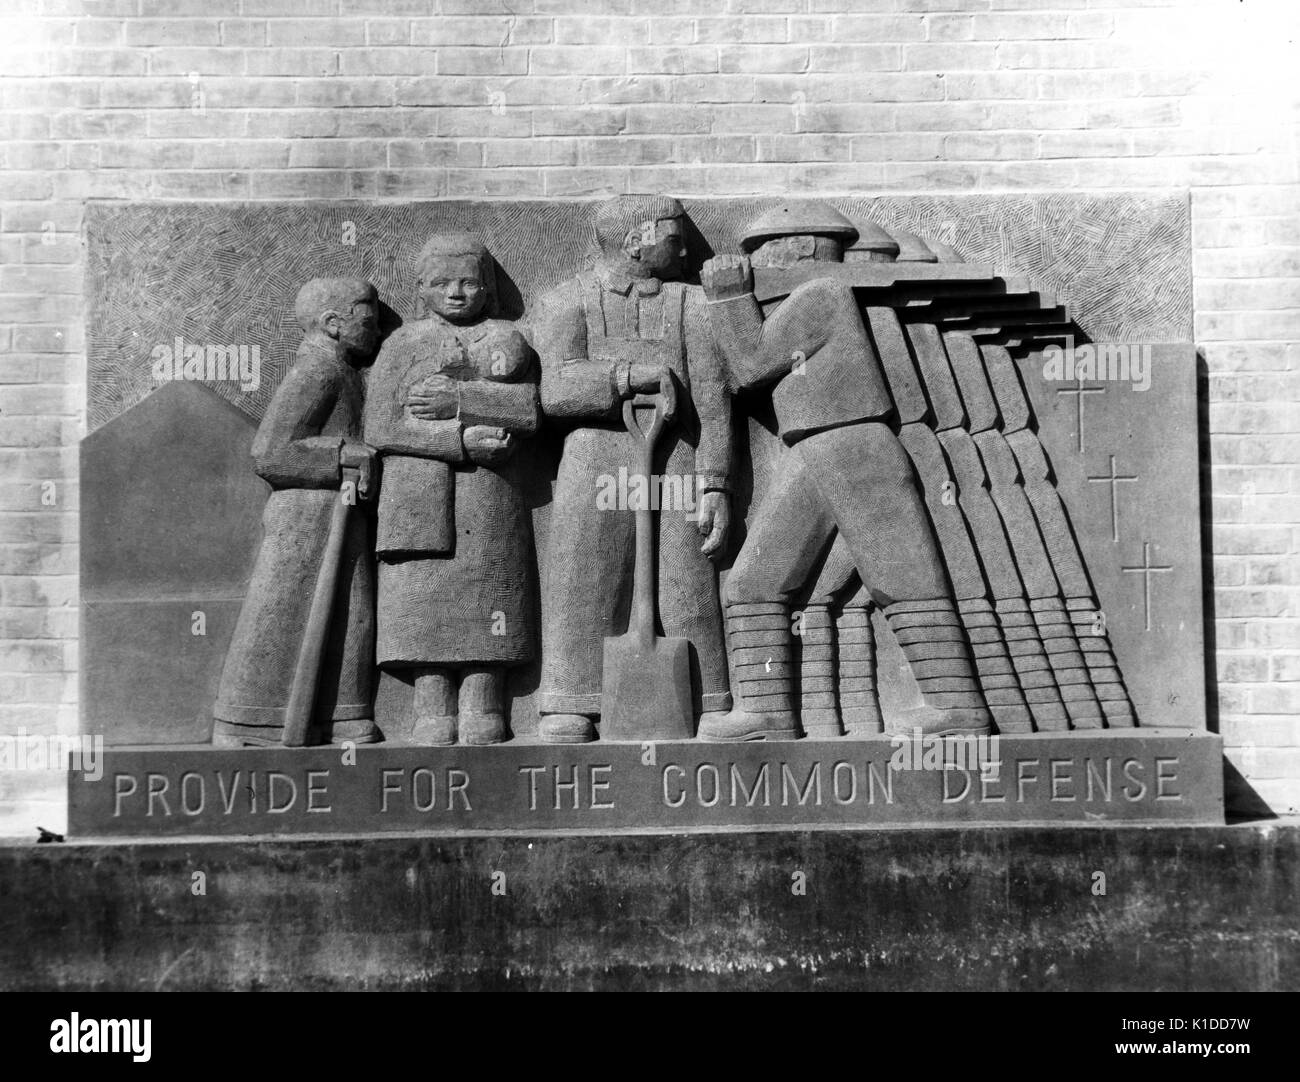 Works Projects Administration (WPA) bas-reliefs of soldiers with text reading Provide for the Common Defense, at Greenbelt school, Maryland, 1937. From the New York Public Library. Stock Photo